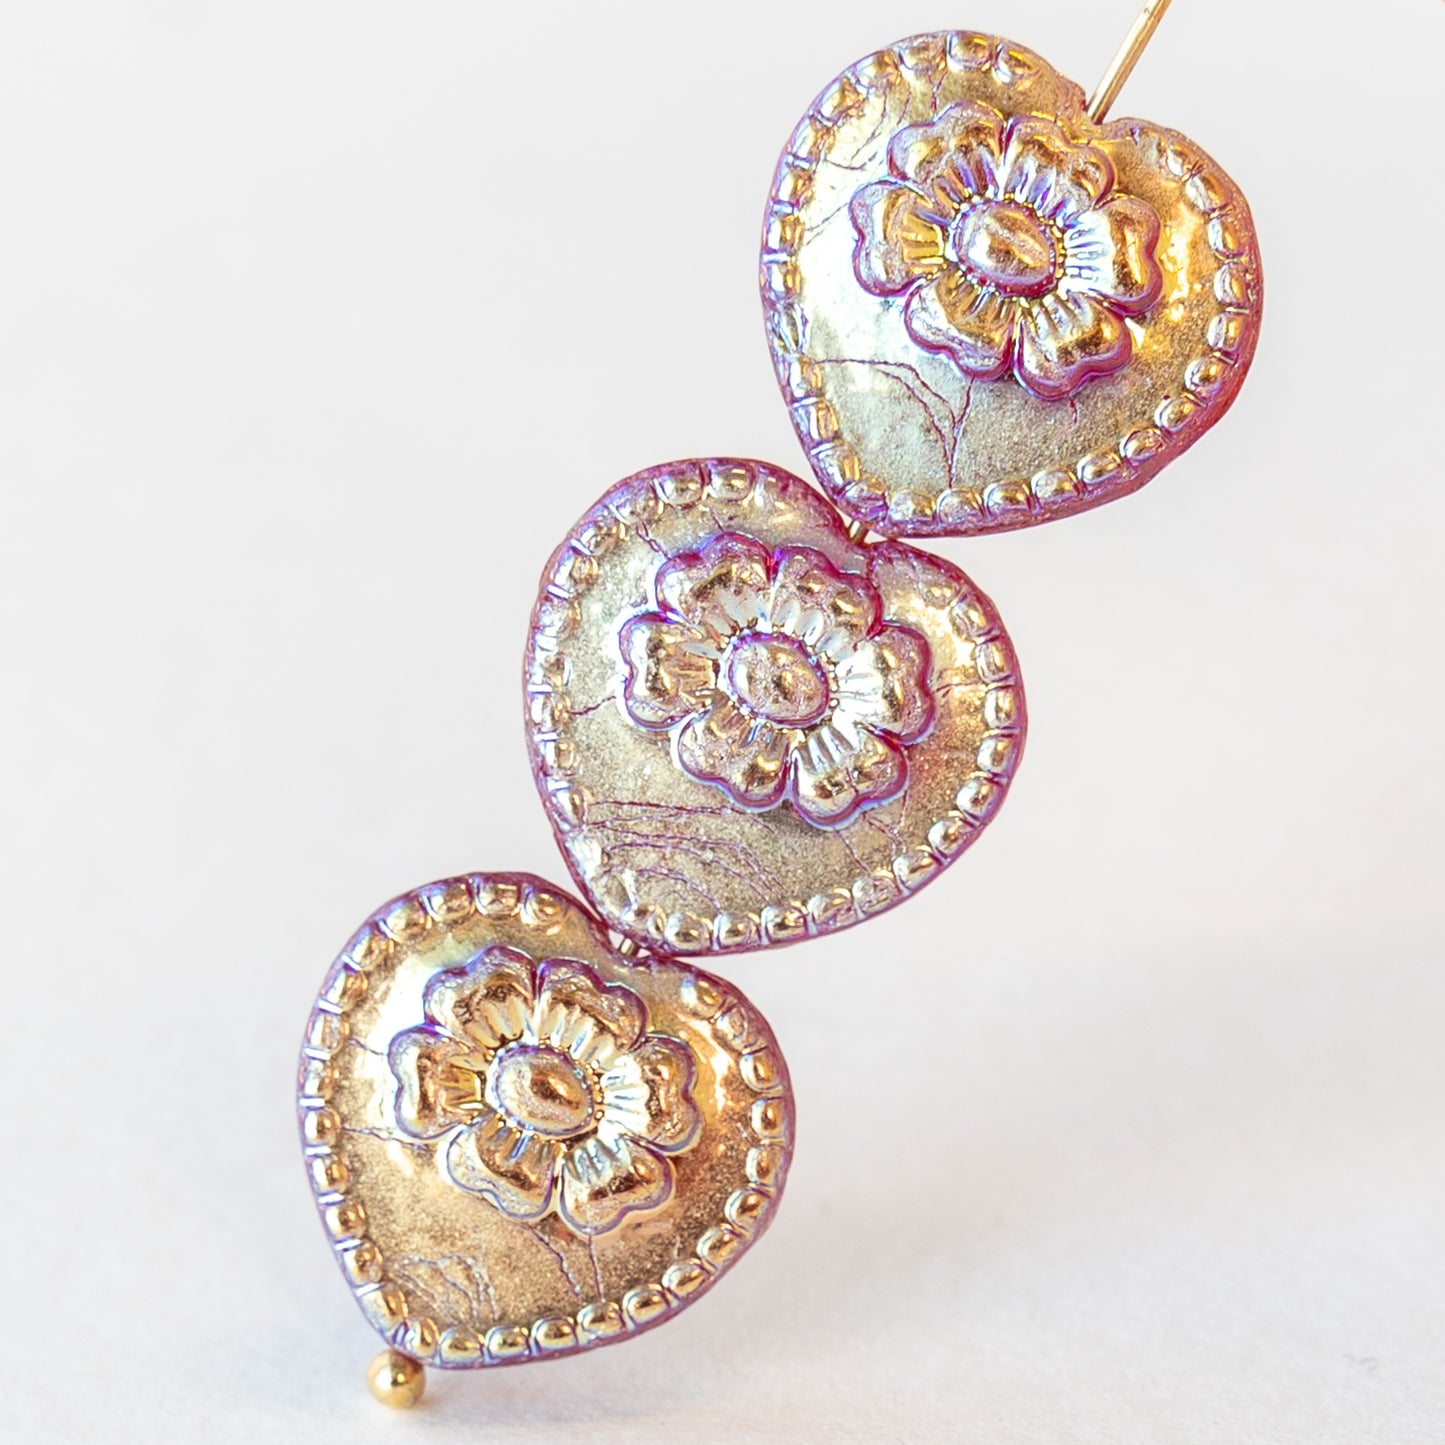 17mm Glass Heart Beads - Raspberry Gold... ish - 4 or 12